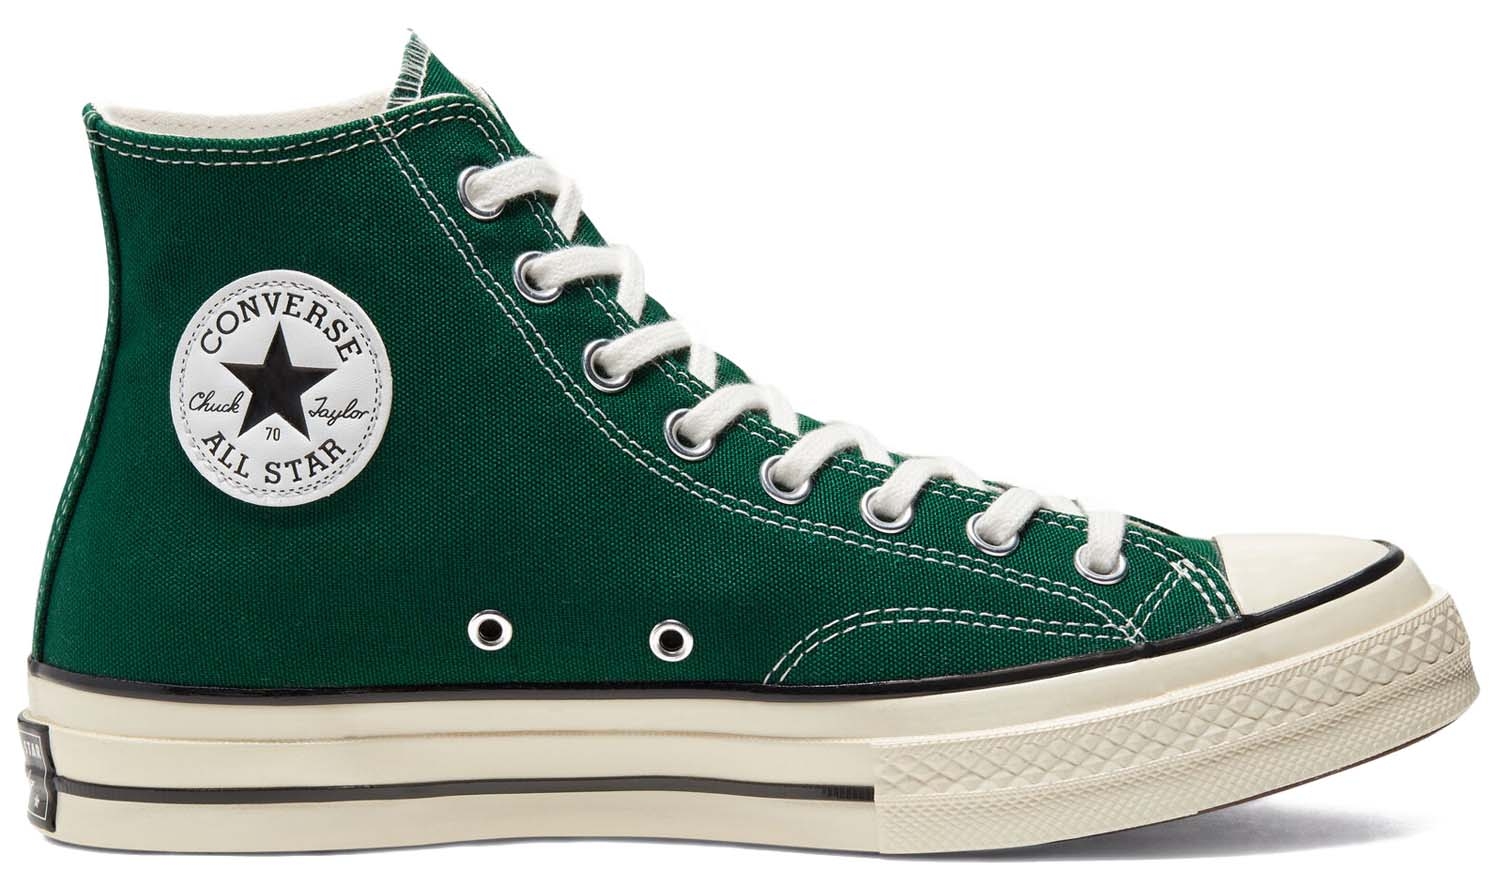 green converse sneakers